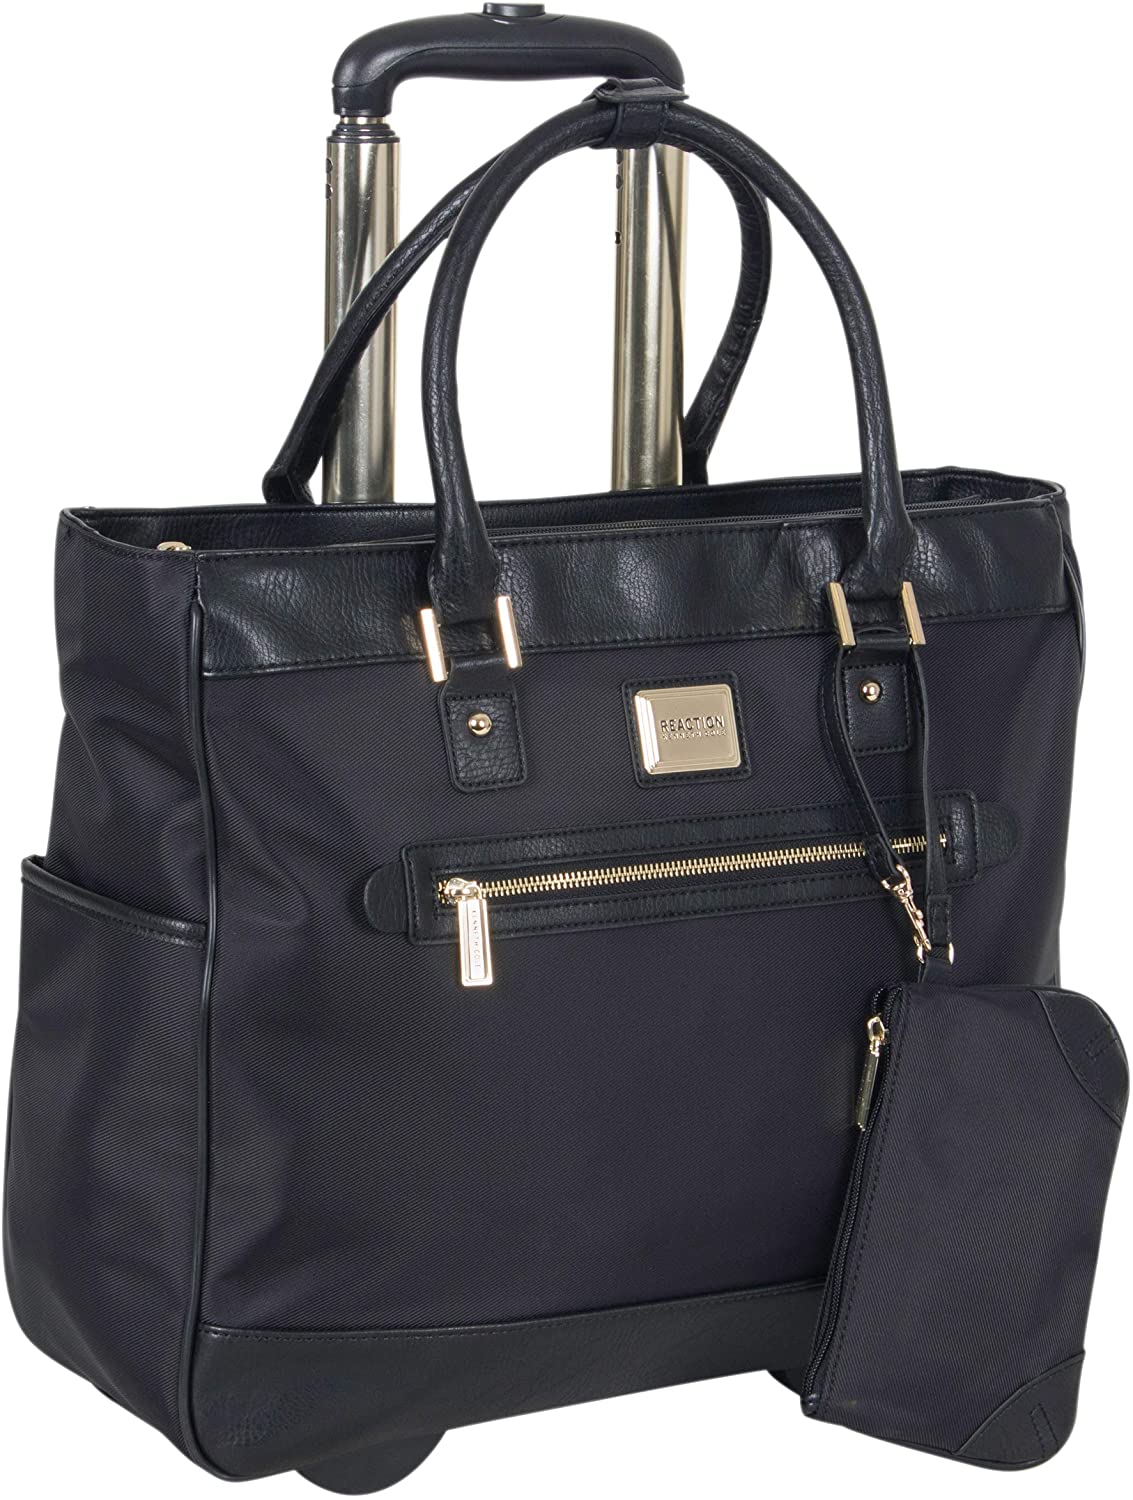 <strong>10. Kenneth Cole Reaction Runway Call Nylon-Twill Bag</strong>